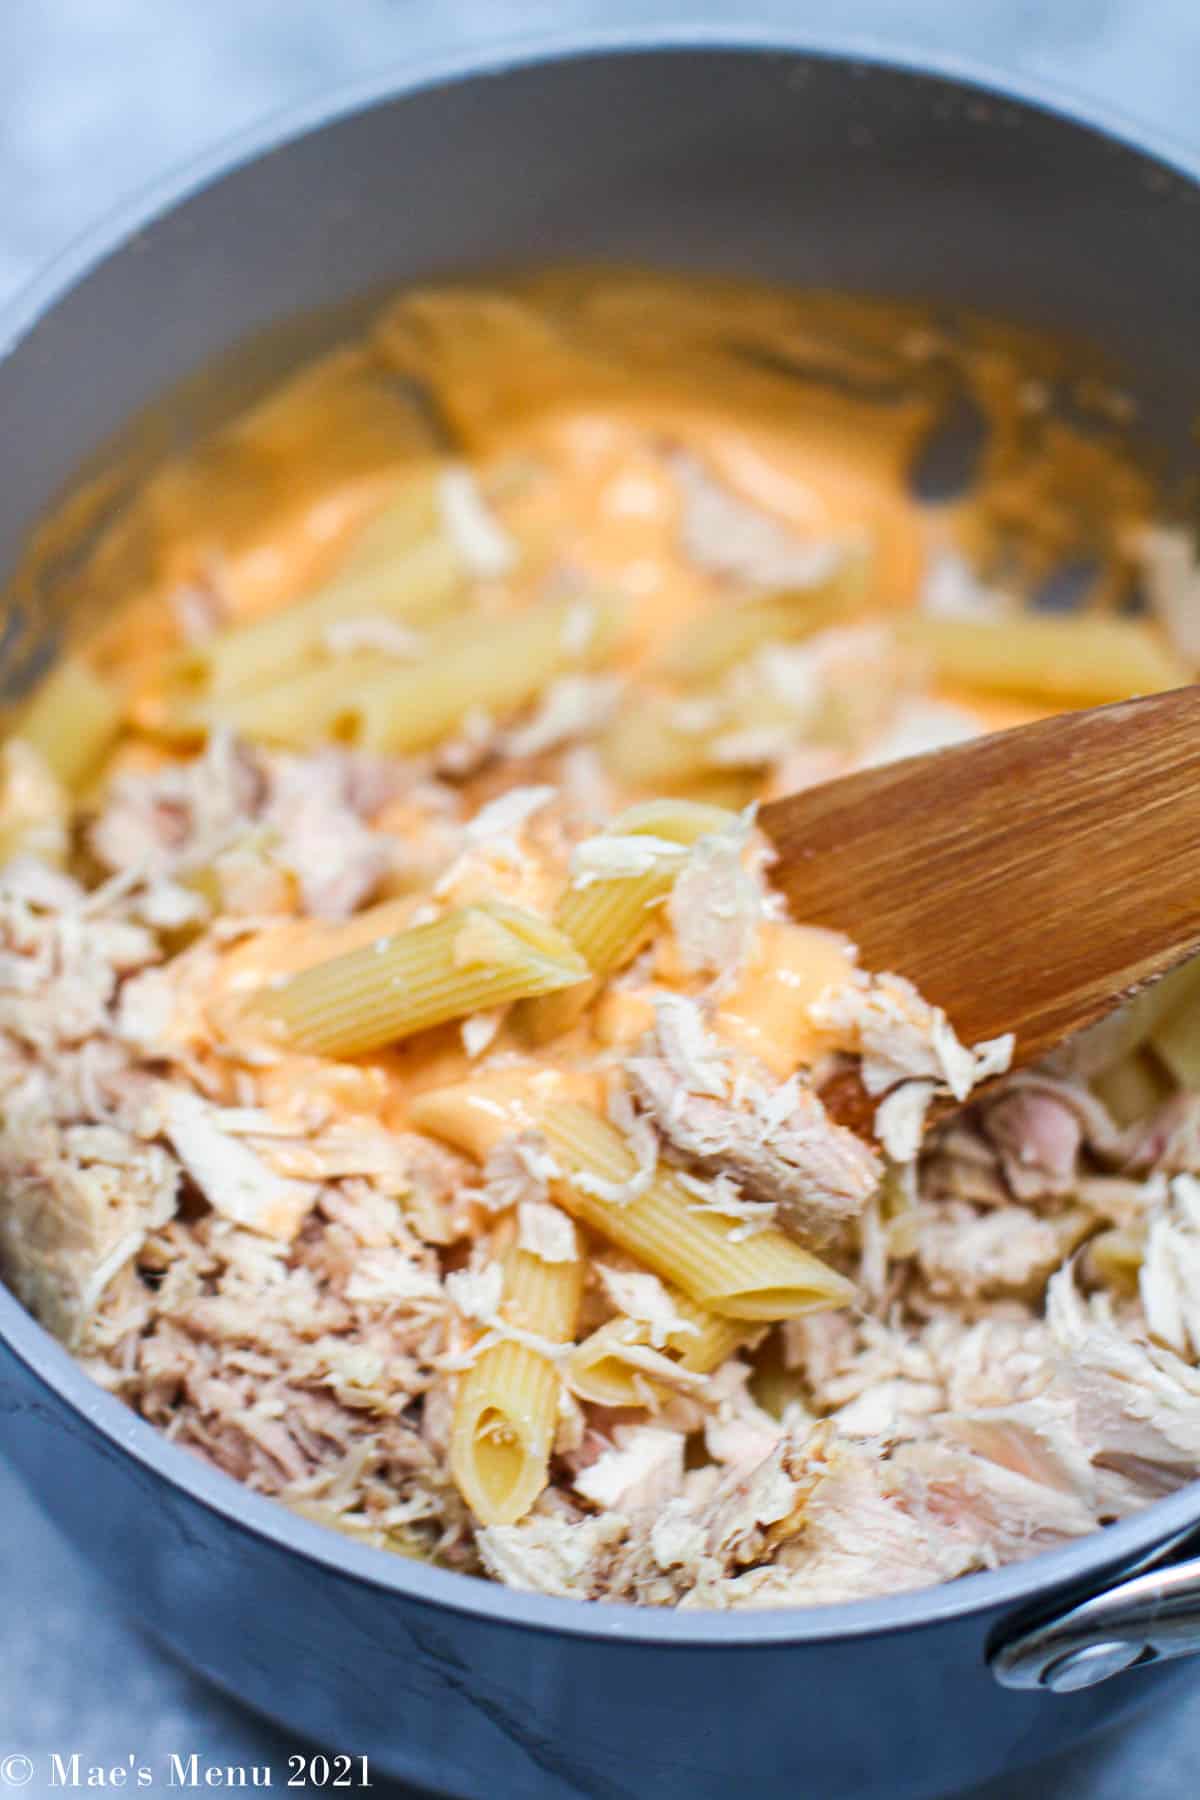 Mixing pasta and flaked tuna into a cheesy sauce